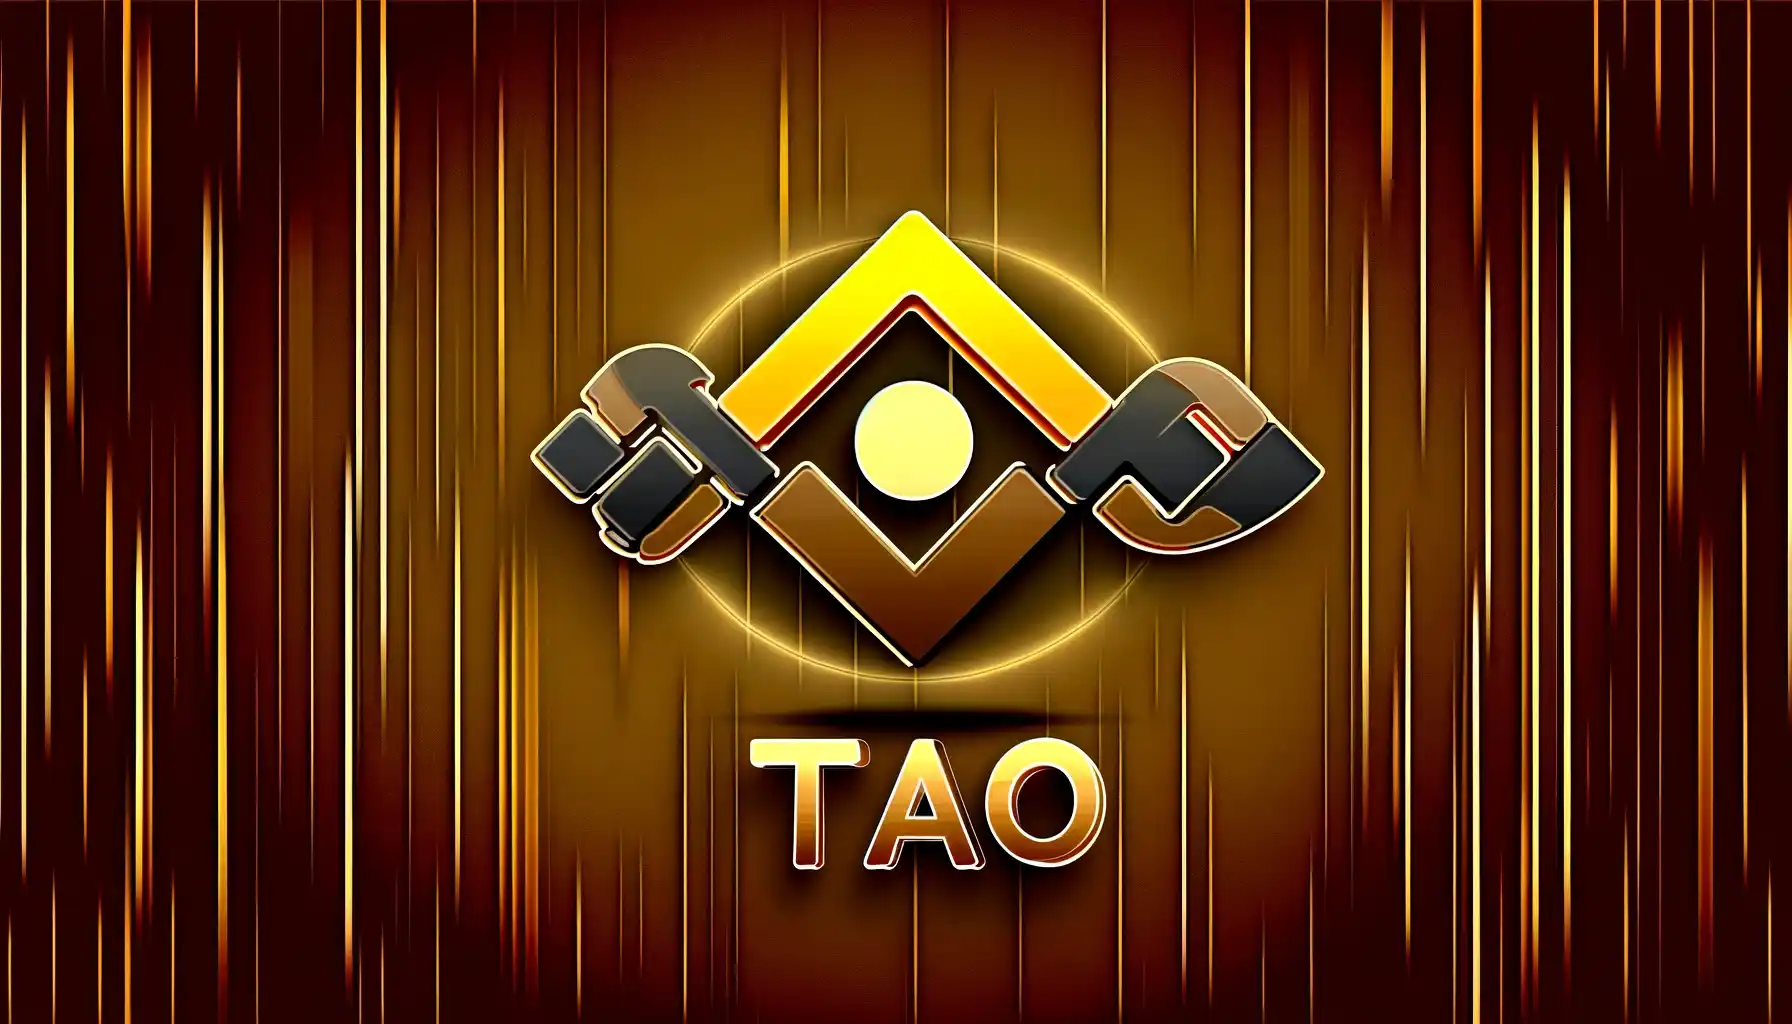 Binance effect: TAO jumps 26% before pulling back, but why?